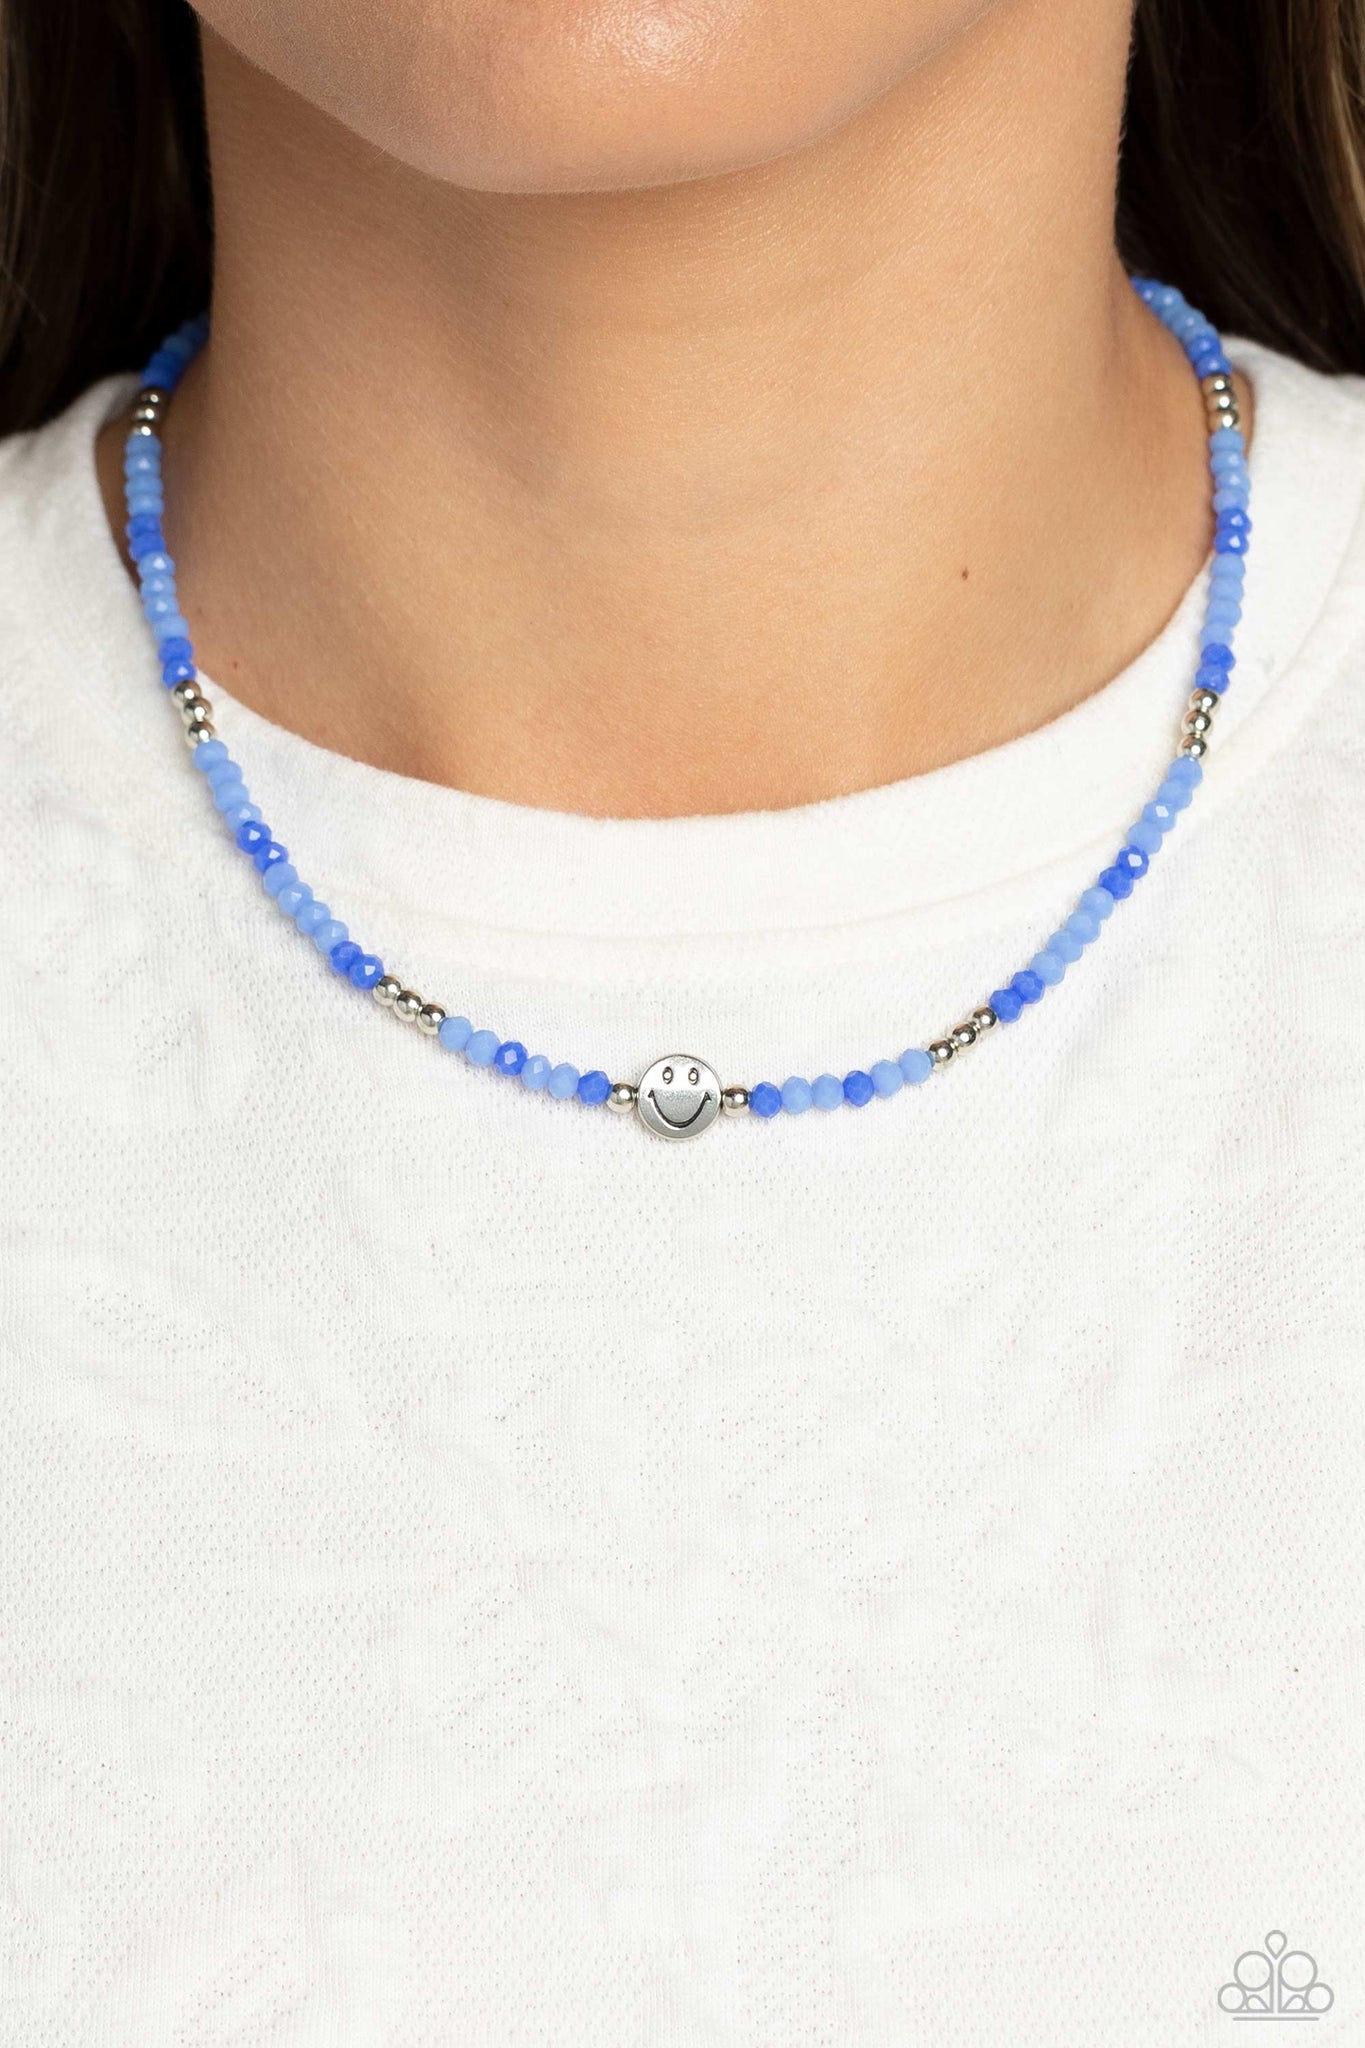 Beaming Bling Necklace (Blue, Multi)